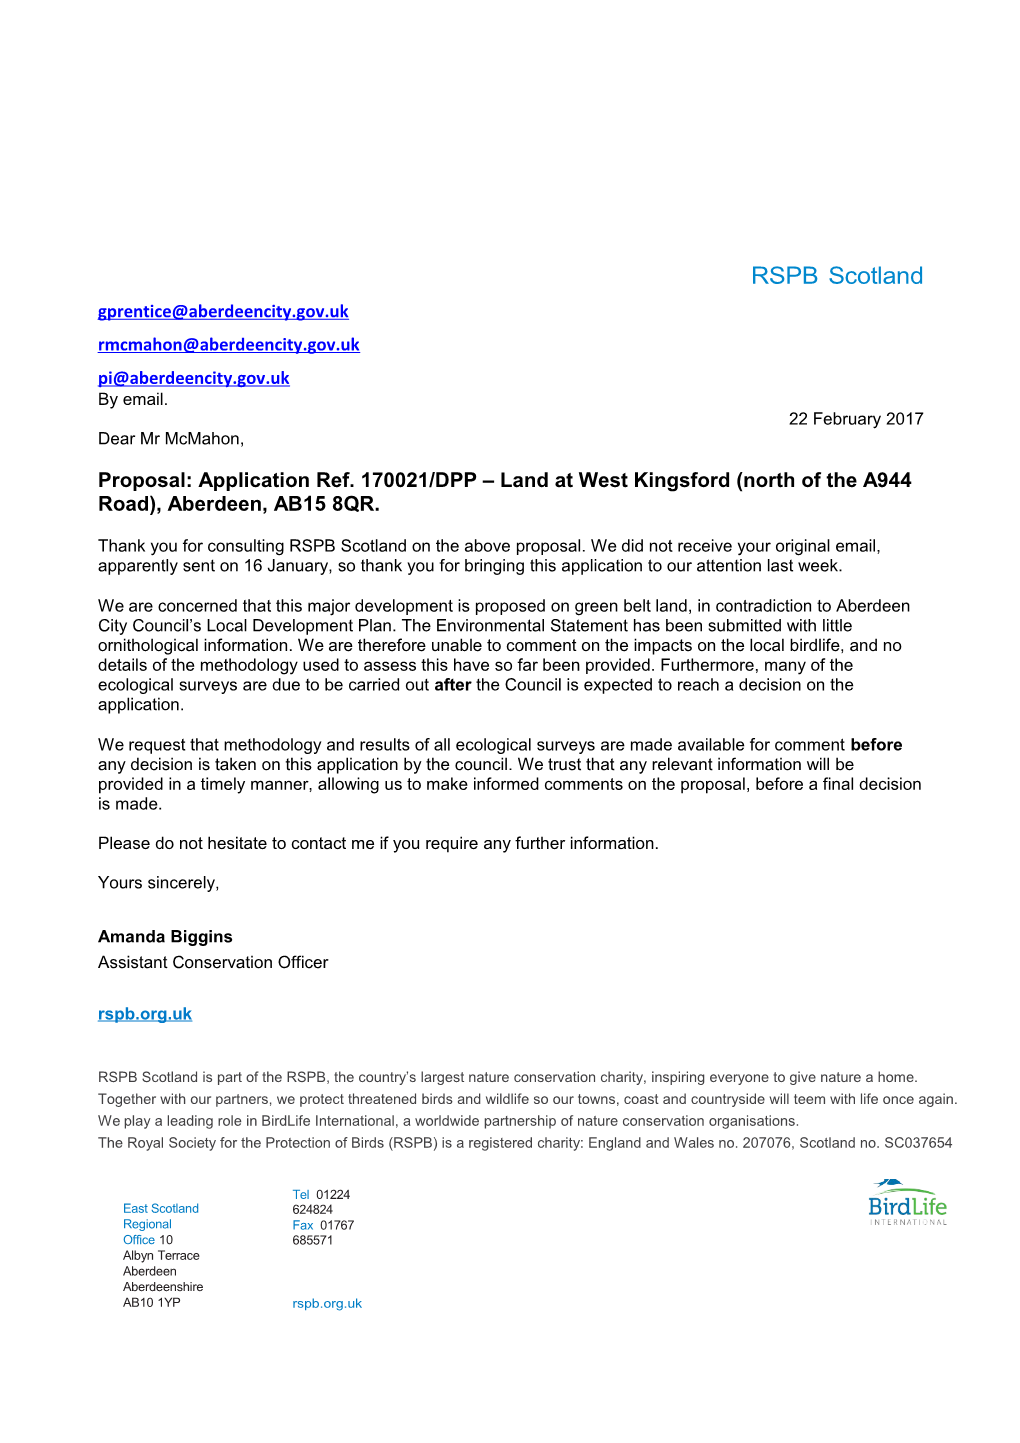 Proposal: Application Ref. 170021/DPP Land at West Kingsford (North of the A944 Road)